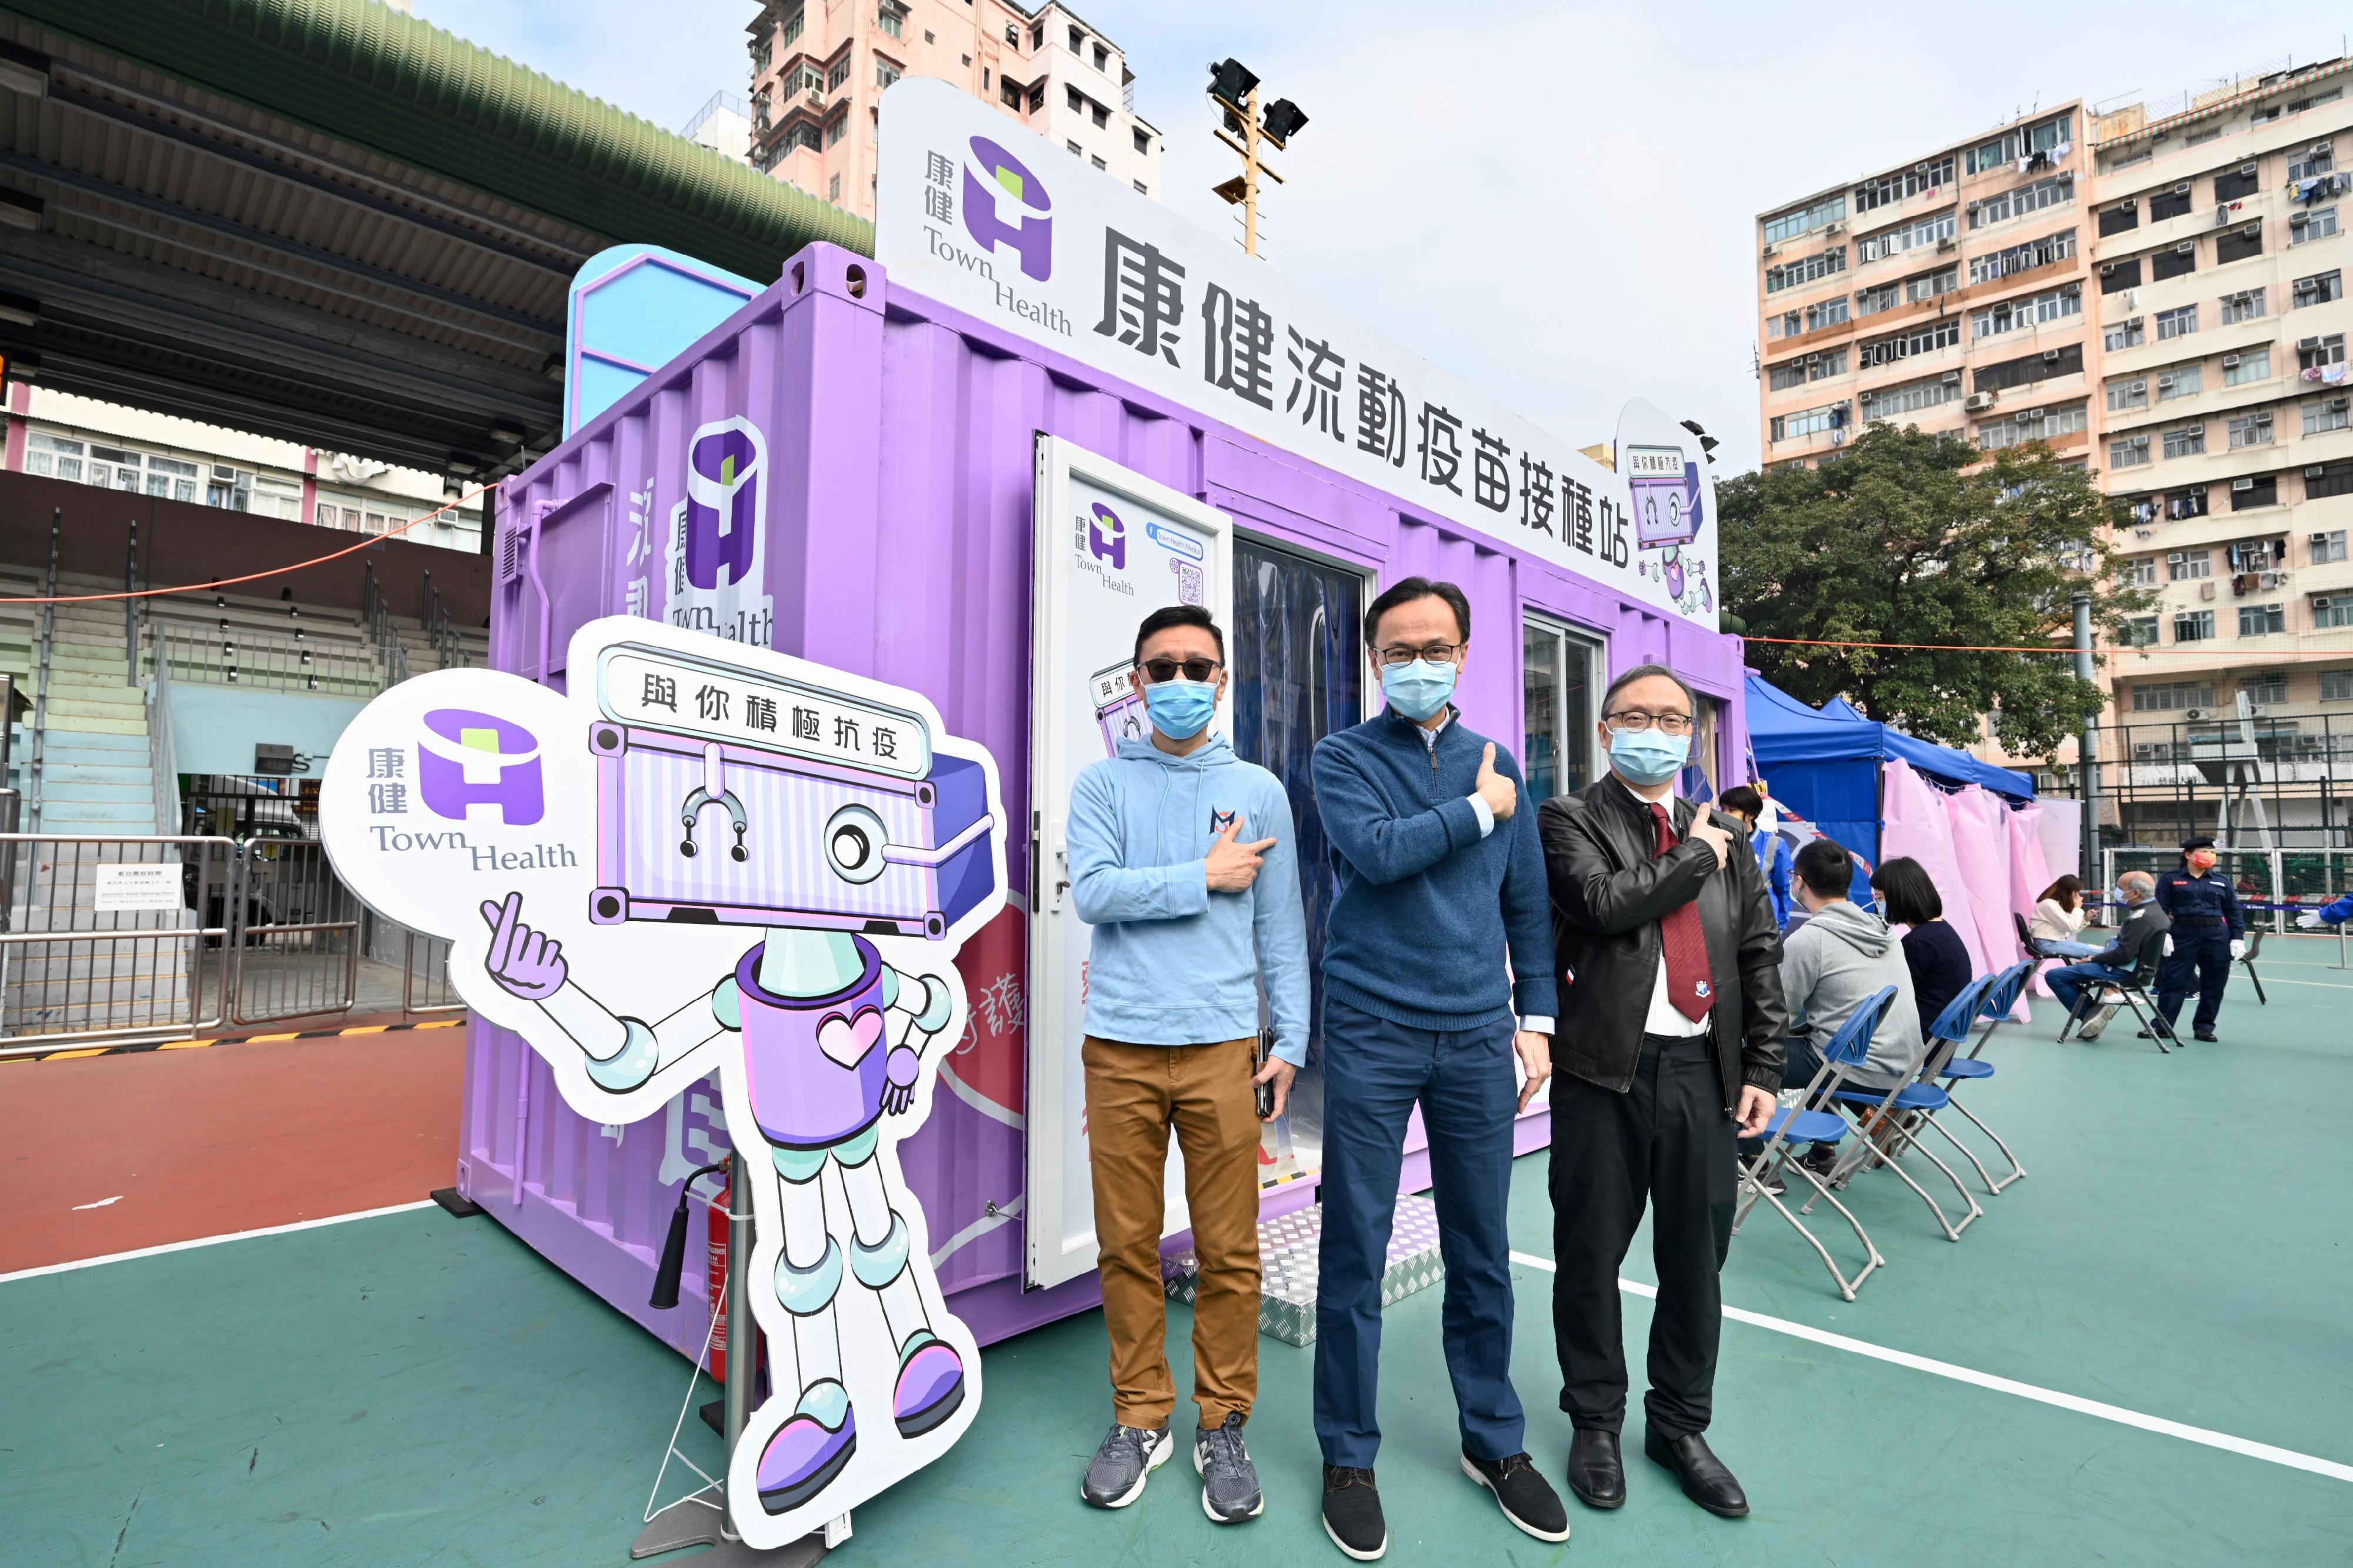 The Secretary for the Civil Service, Mr Patrick Nip, today (January 15) inspected the operation of a COVID-19 Mobile Vaccination Station (MVS) at Maple Street Playground in Sham Shui Po. Picture shows Mr Nip (centre) with the District Officer (Sham Shui Po), Mr Paul Wong (left) and the operator of the MVS.

